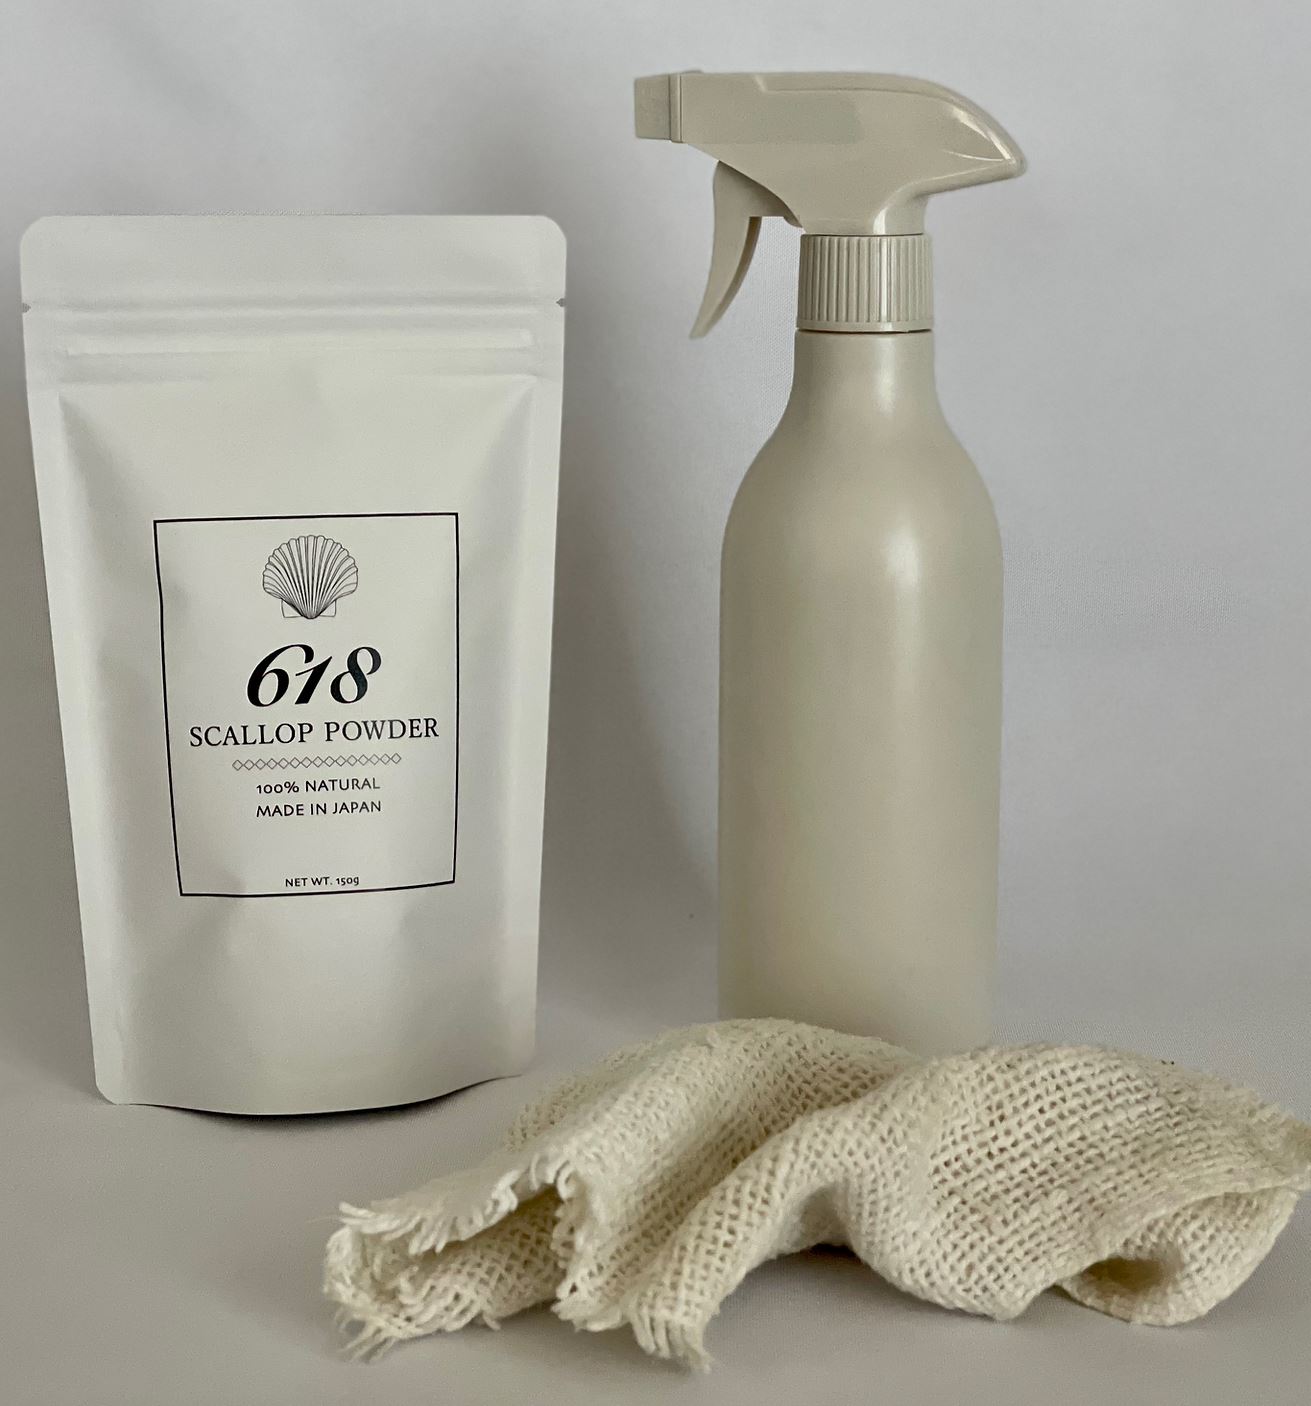 618 Scallop Powder - Powerful Non-Toxic cleaning product